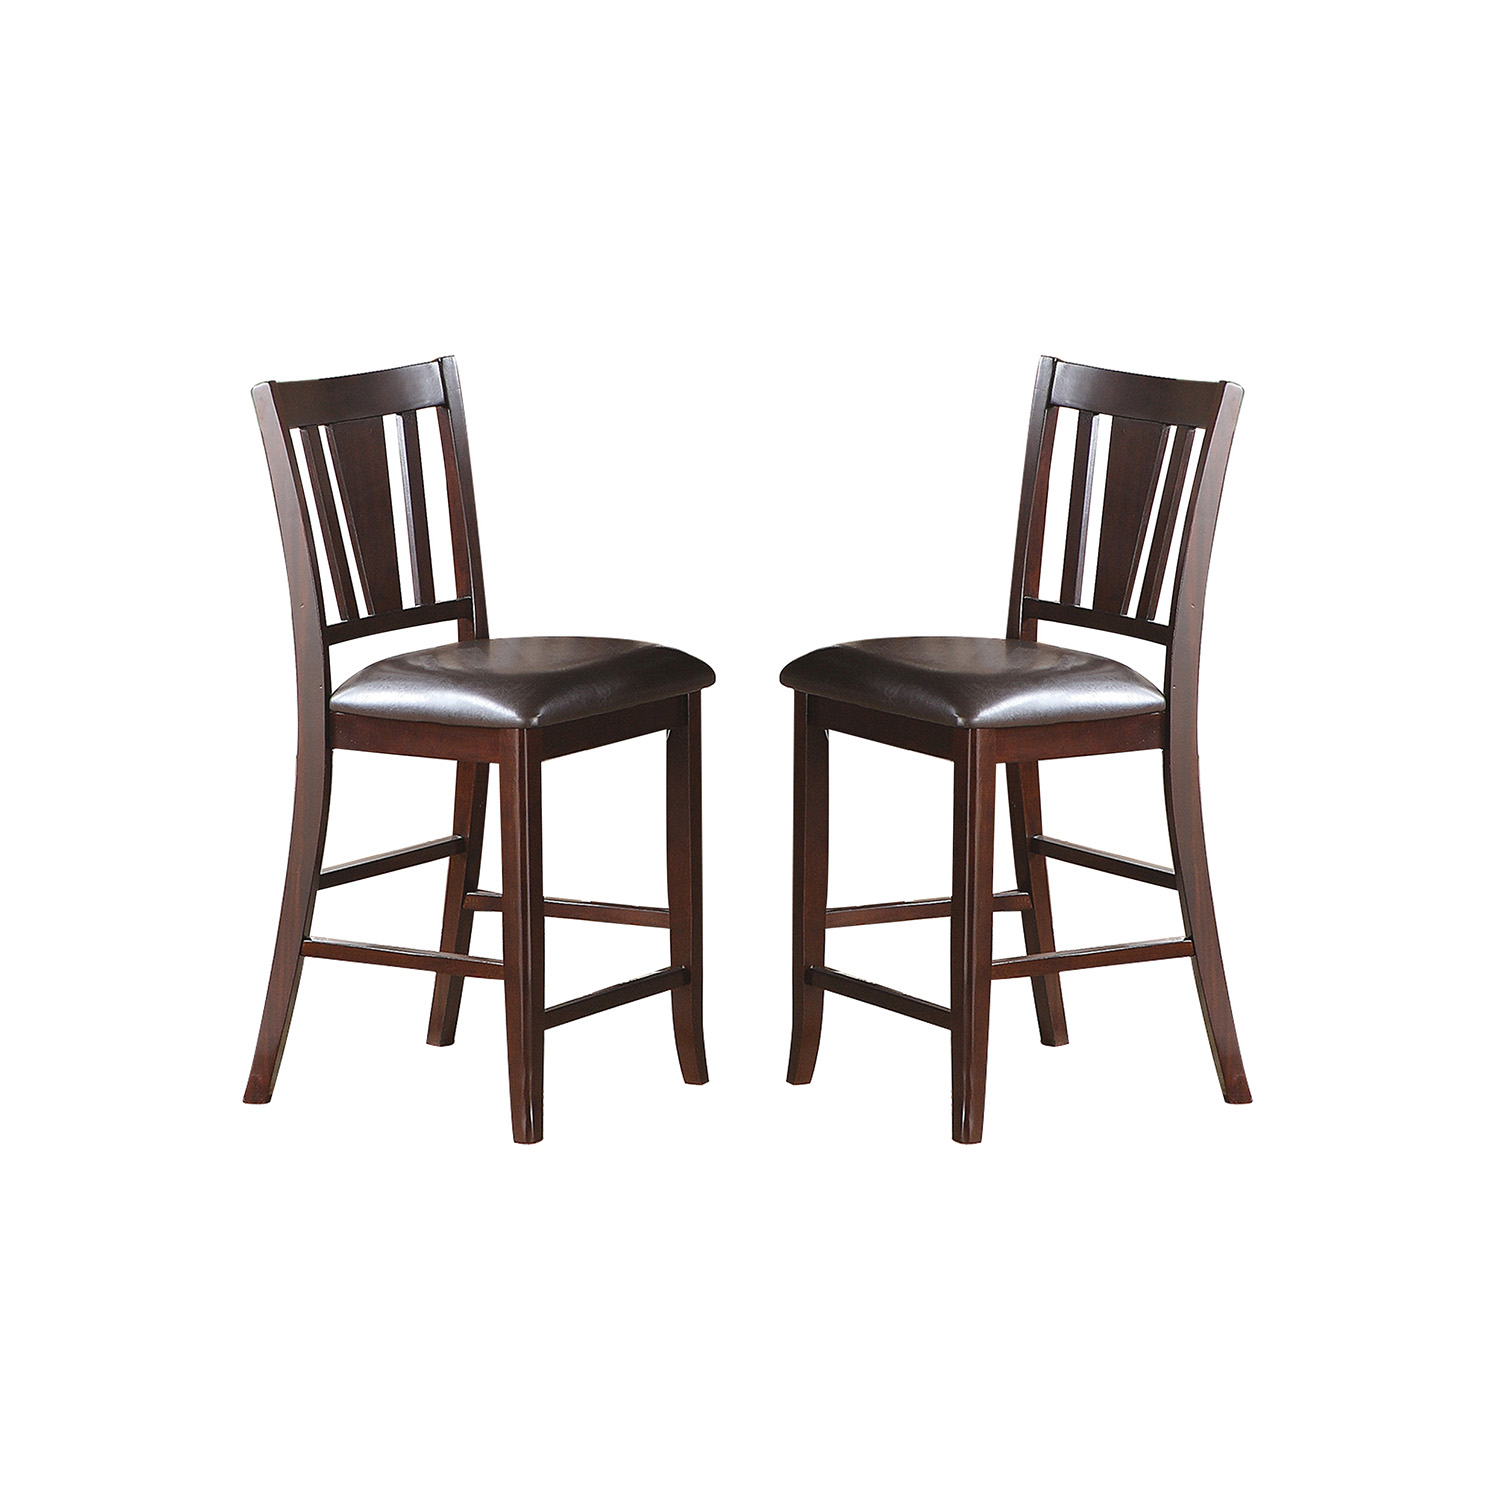 Darrell Upholstered Counter Height Chairs in Dark Brown Finish, Set of 2-CASAINC